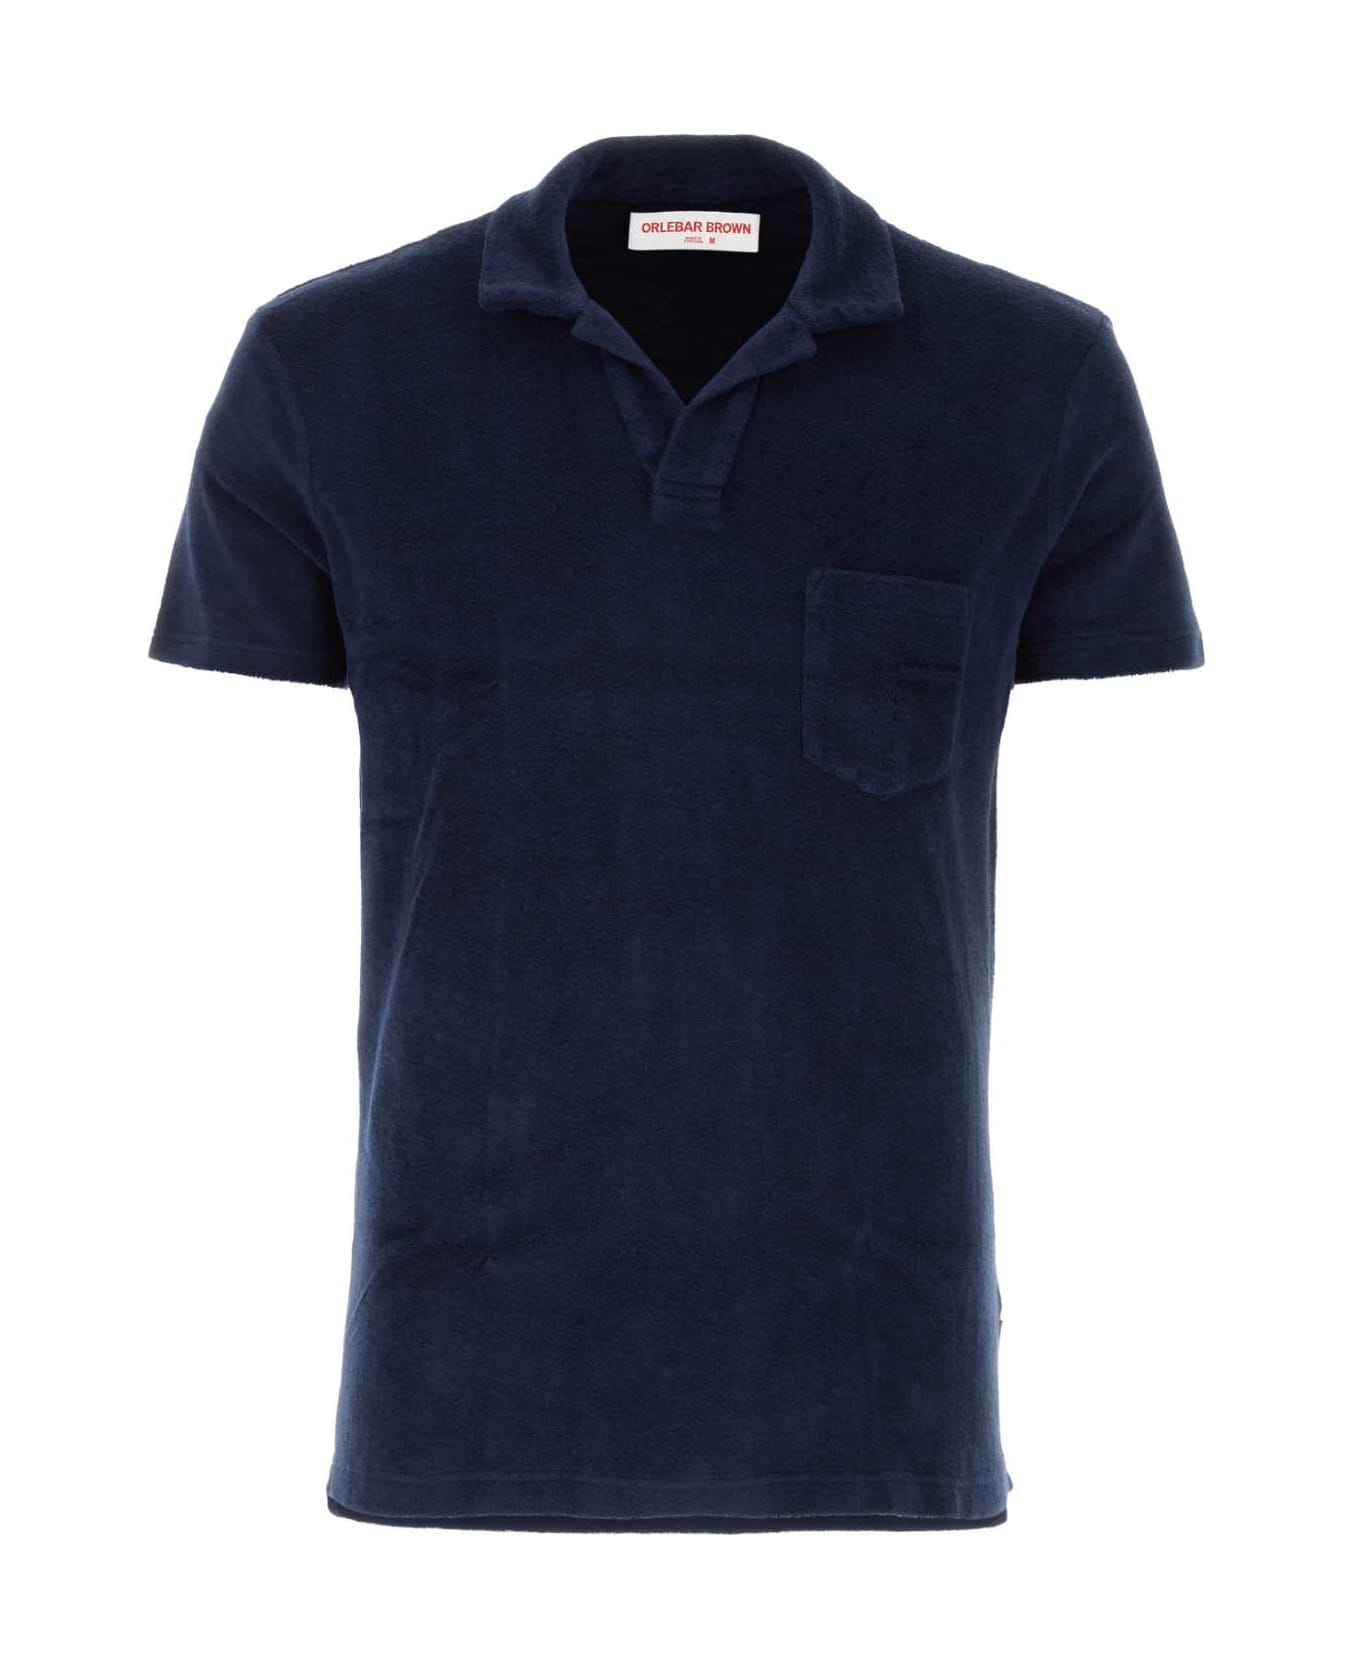 Orlebar Brown Navy Blue Terry Fabric Terry Polo Shirt - NAVY